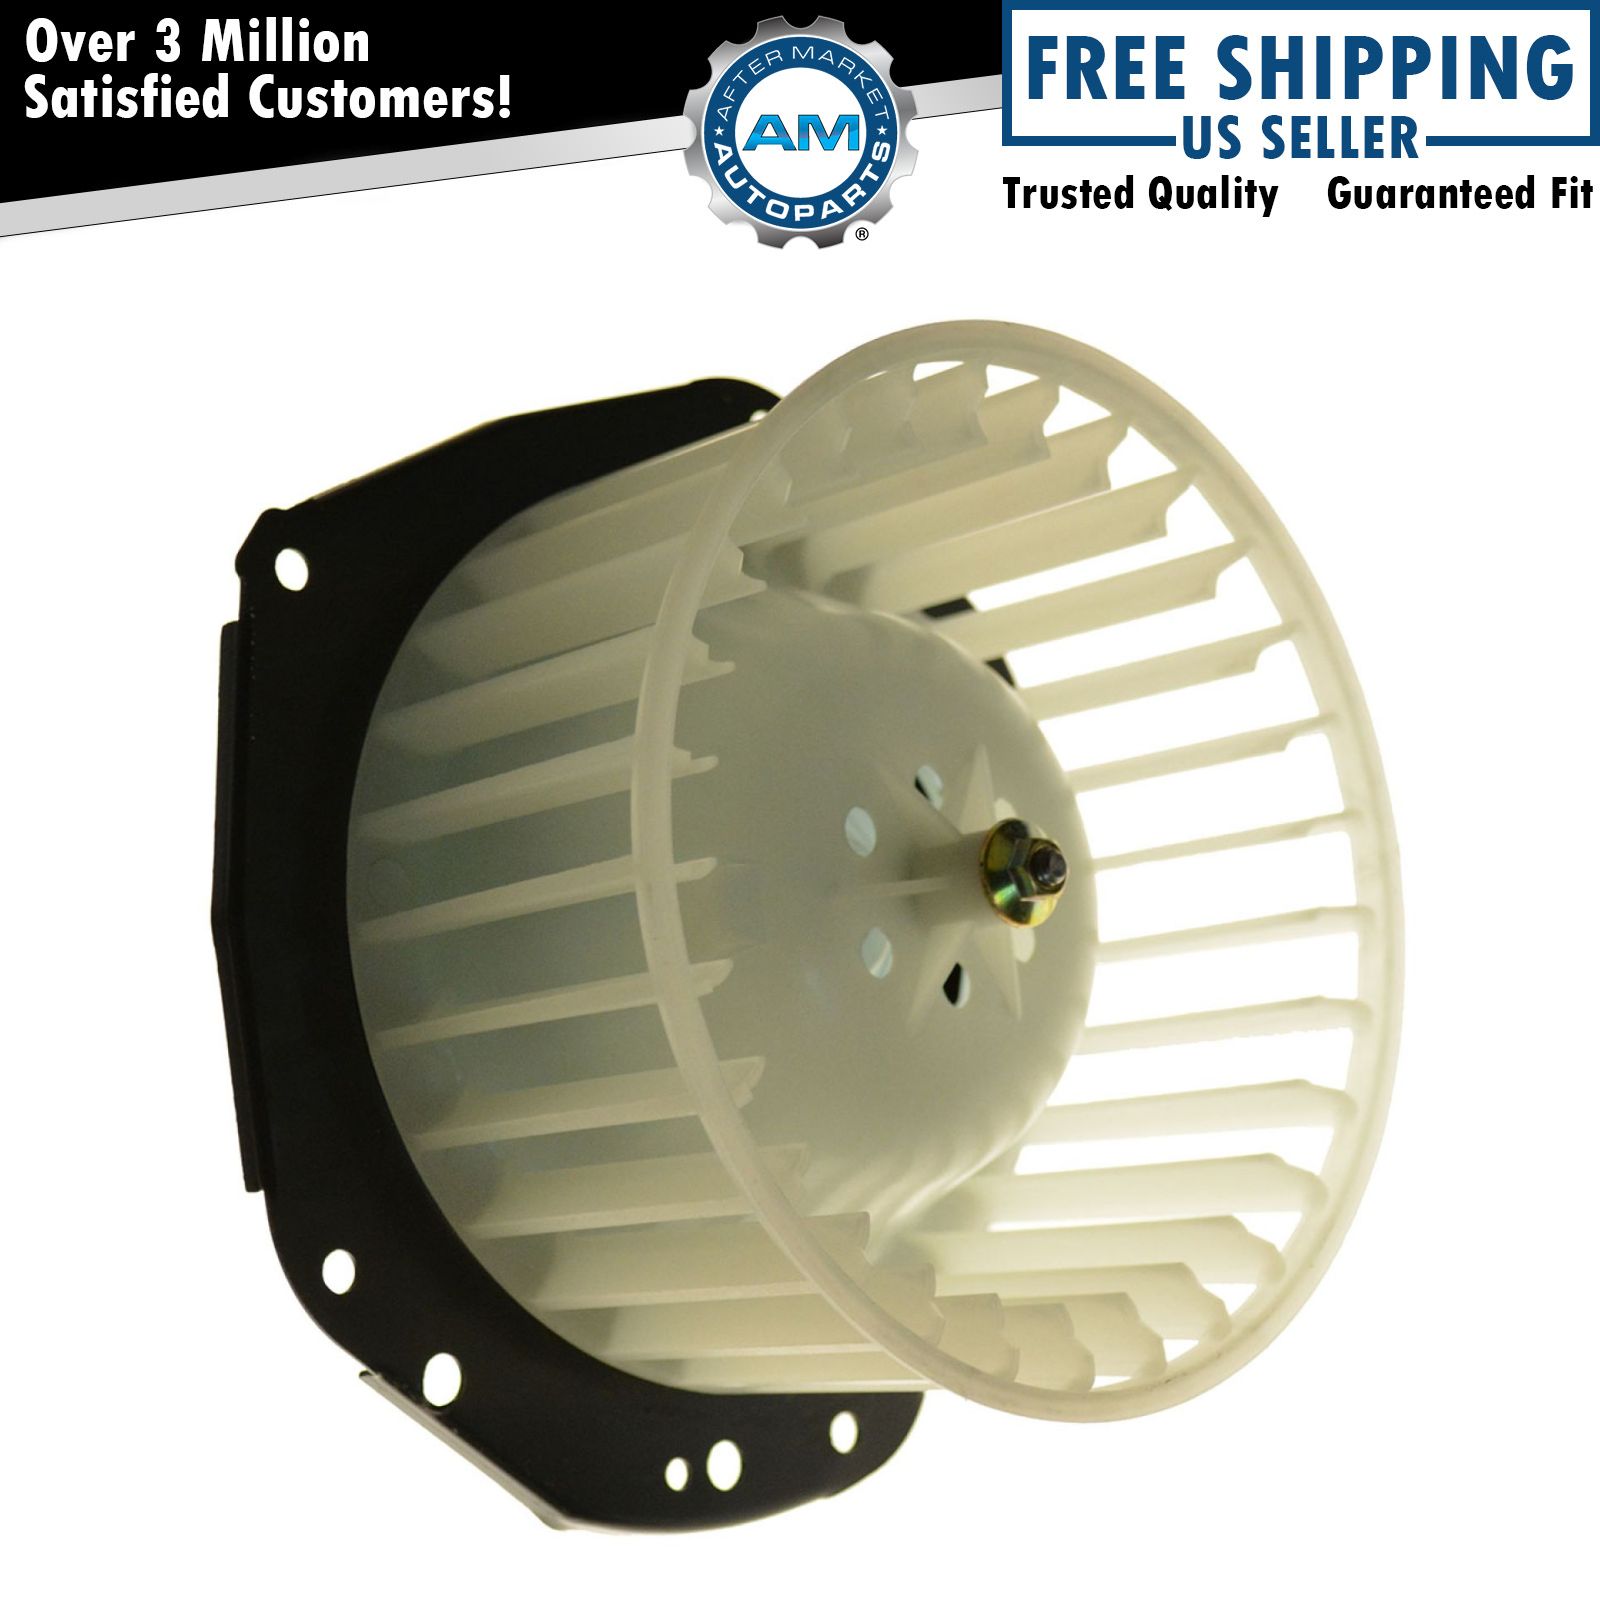 Heater Blower Motor w/Fan Cage for Chevy S10 GMC S-15 Sonoma Pickup Isuzu Hombre